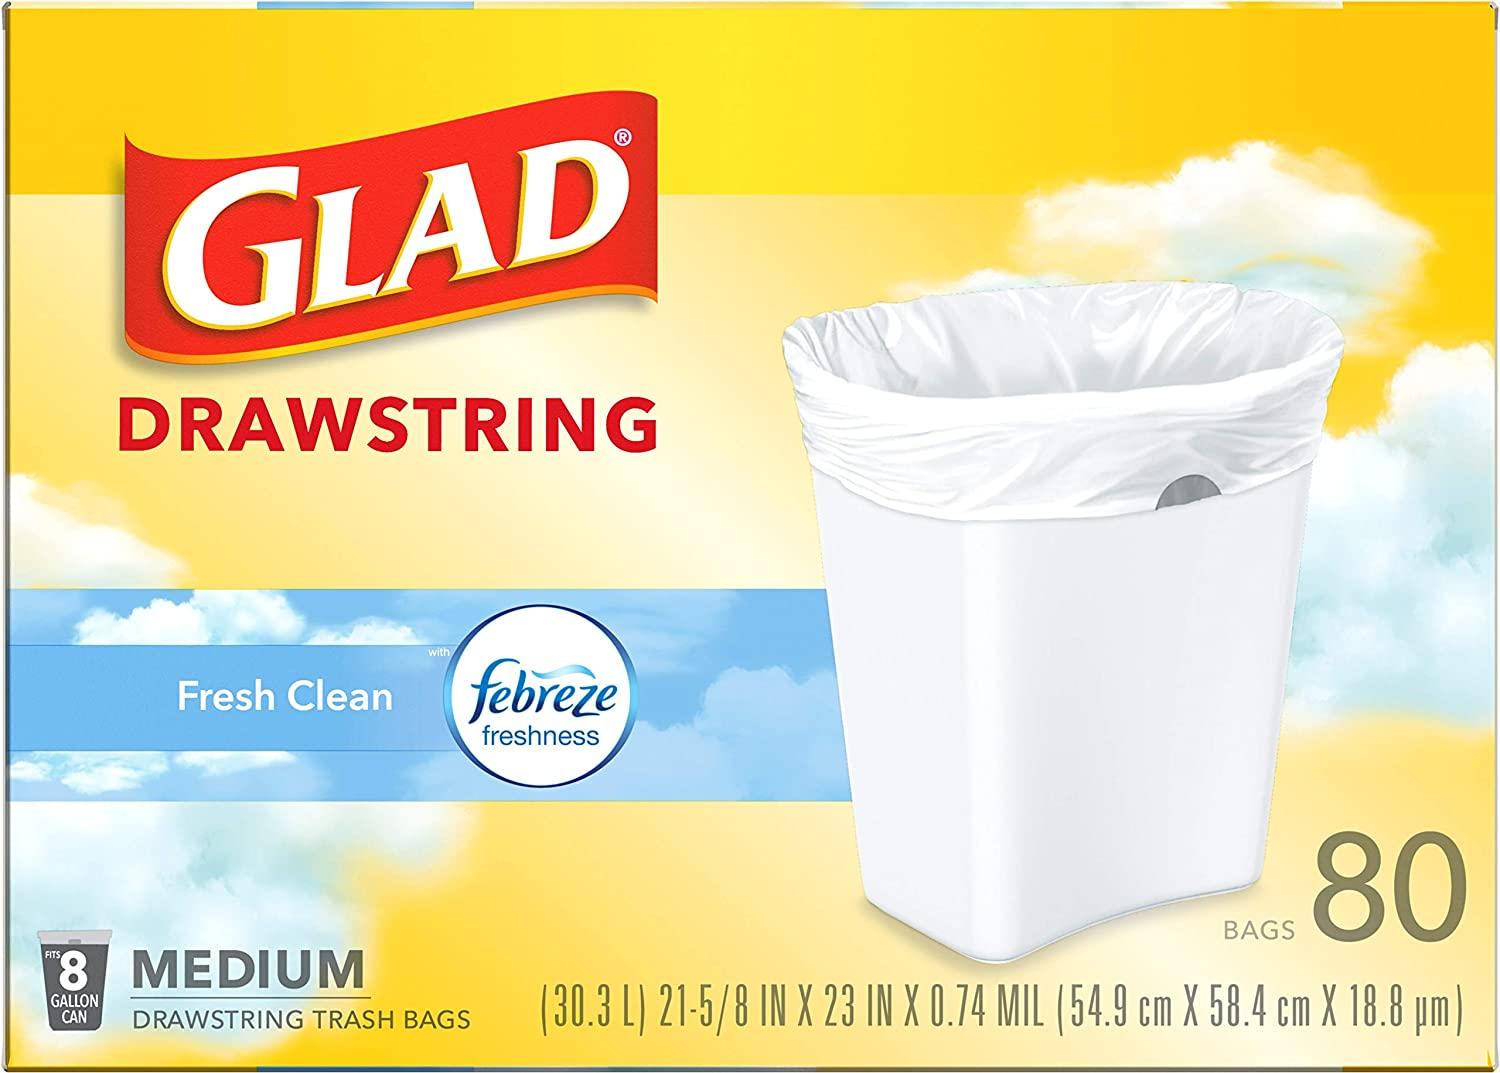 Febreze Glad White Garbage Bags - Small 25 Litres - Fresh Clean